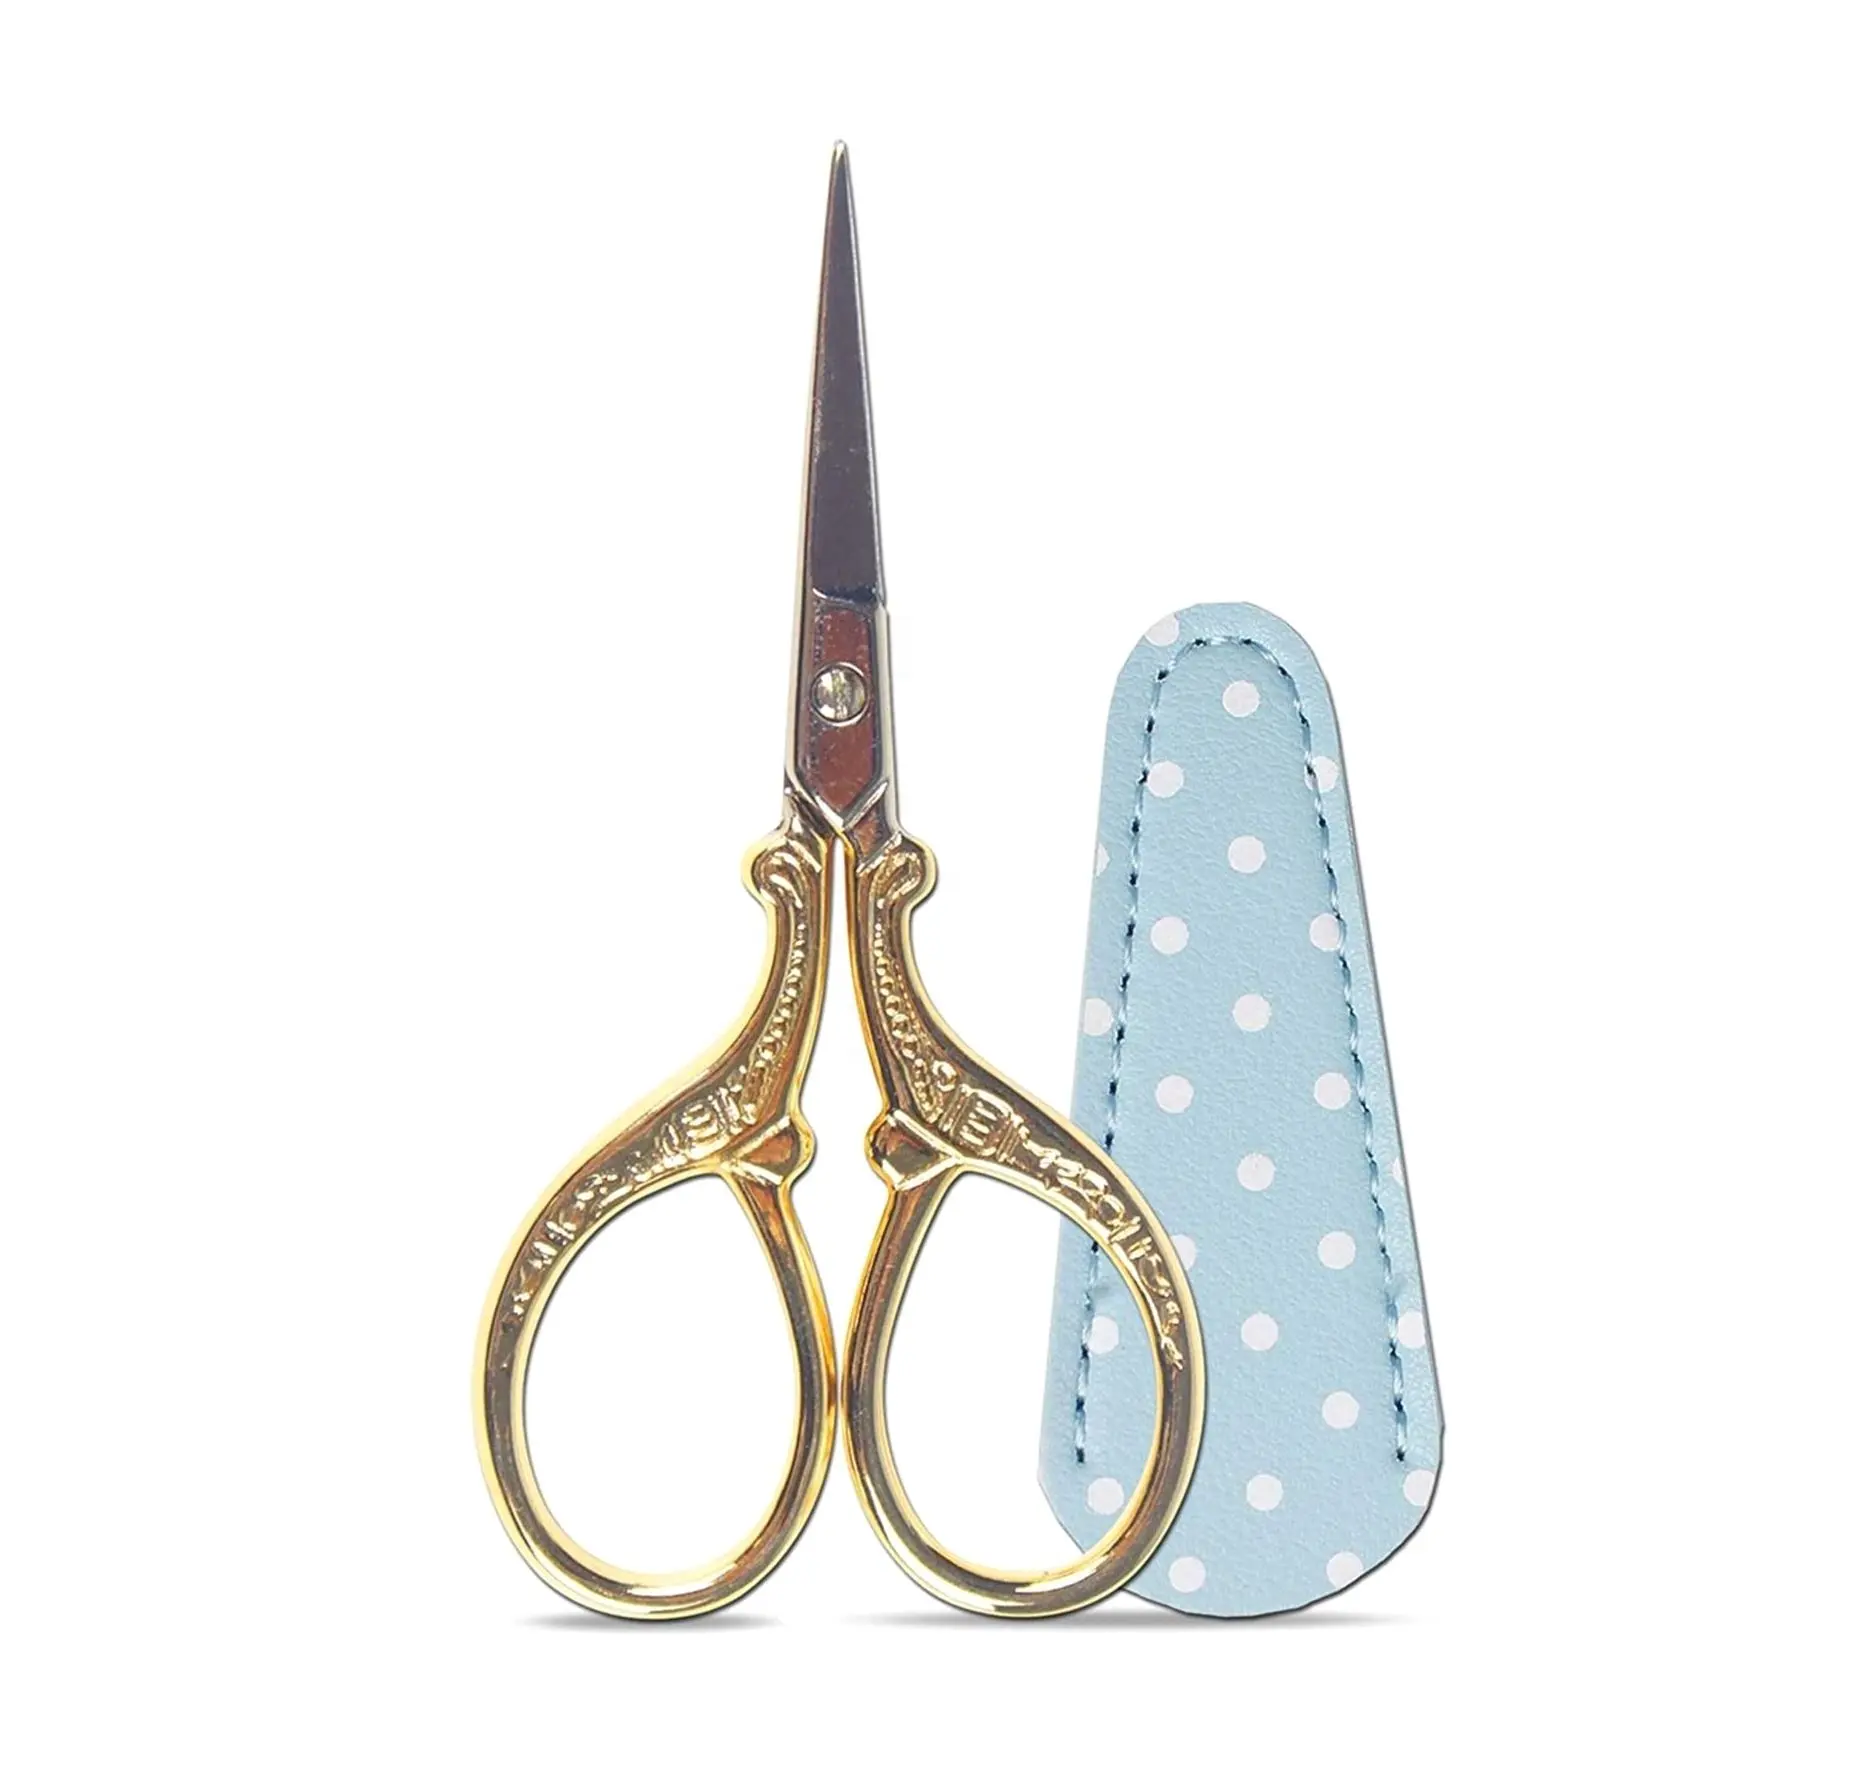 Best Selling Embroidery Scissors with Leather Cover Sewing Scissors Fabric Shears embroidery threads Cutting Sewing Scissors